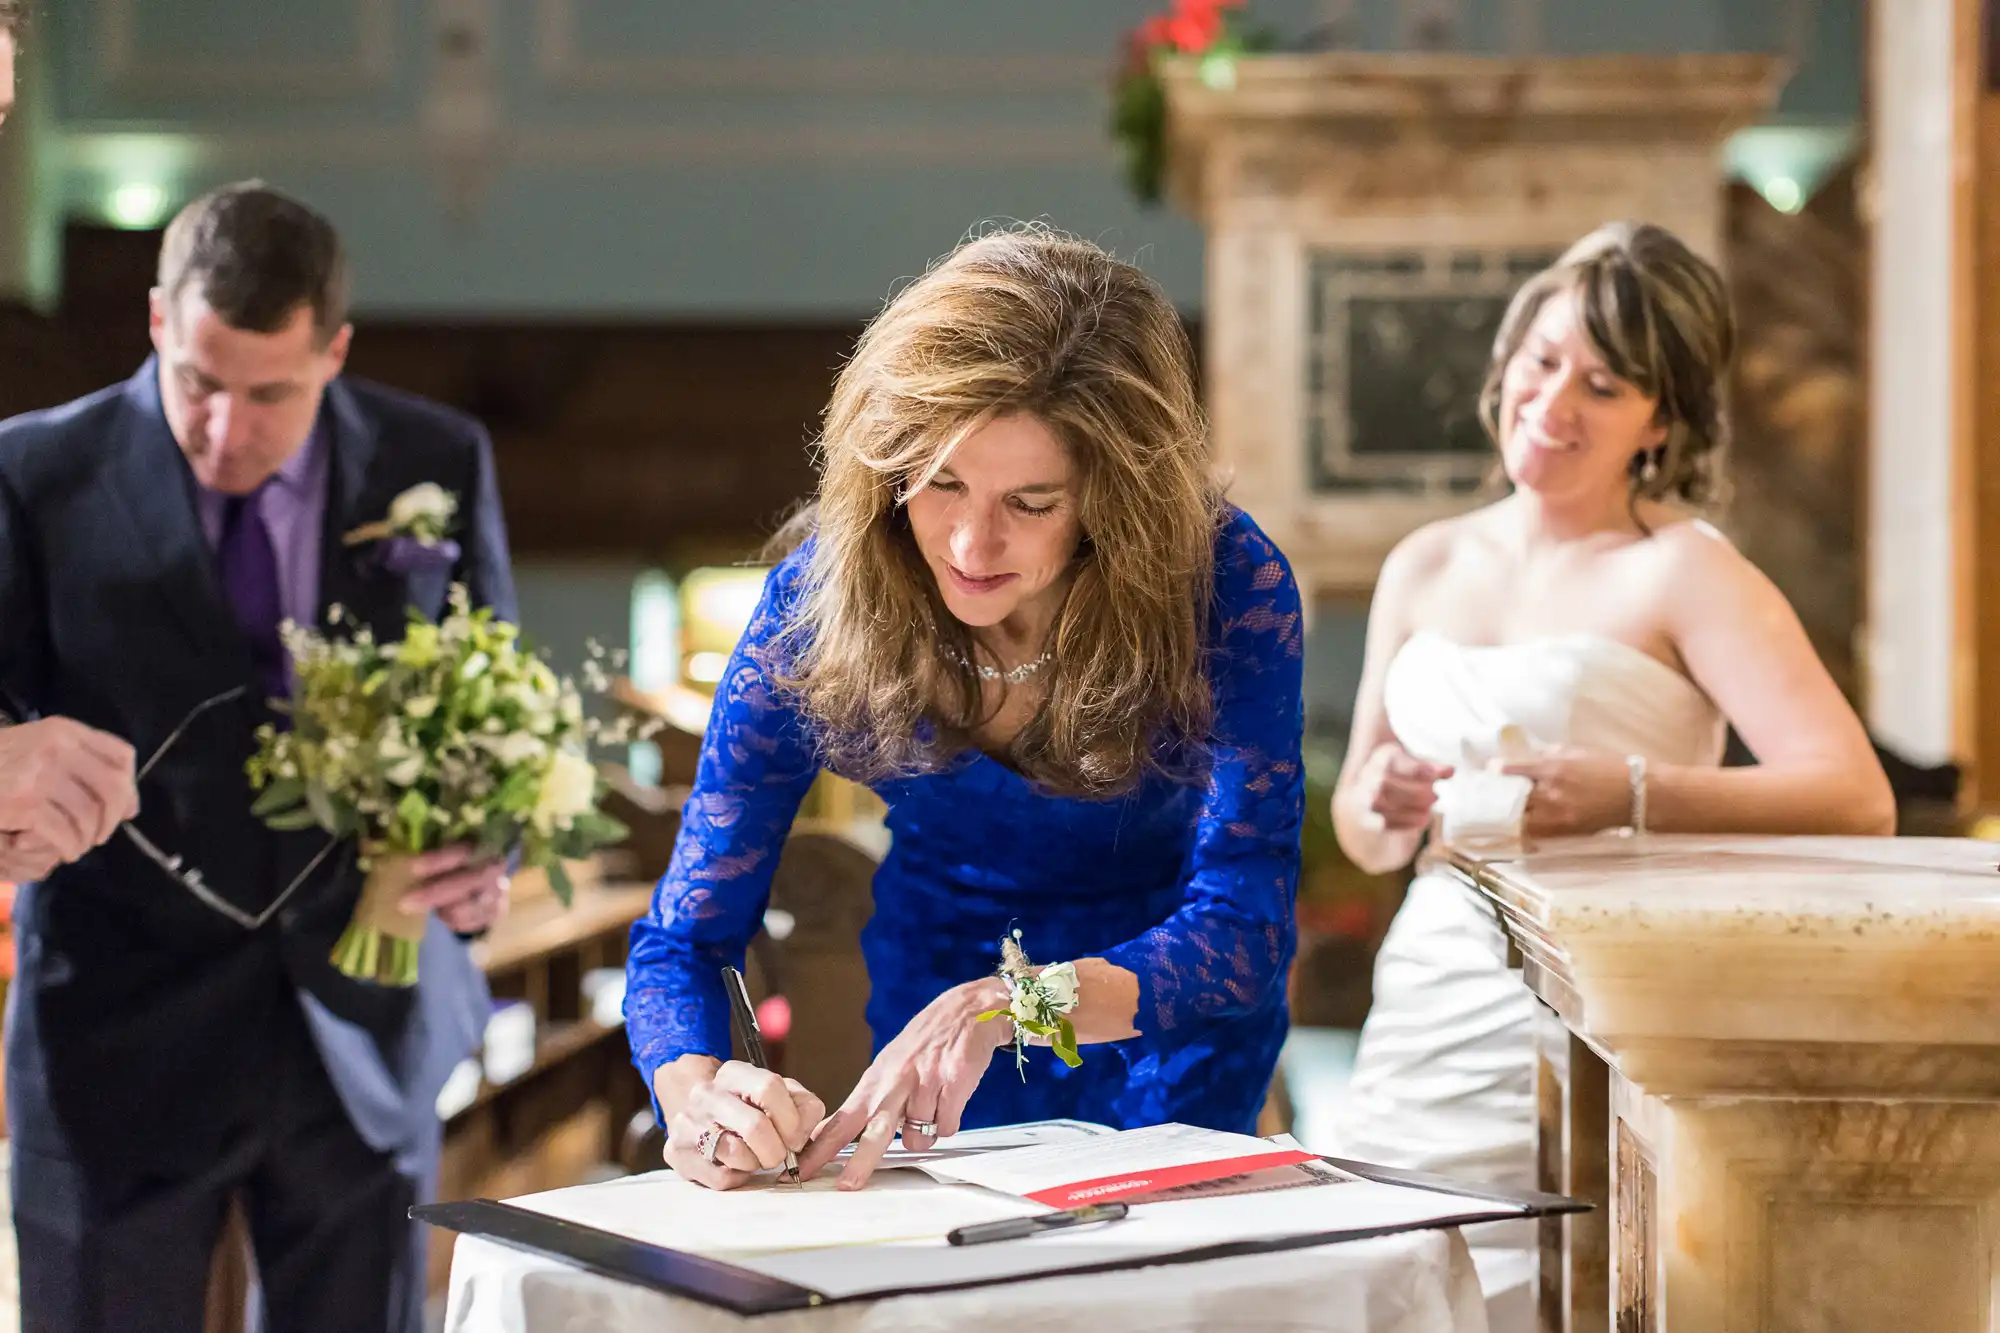 A woman in a blue dress signs a document at a wedding ceremony with a couple and another man standing nearby.